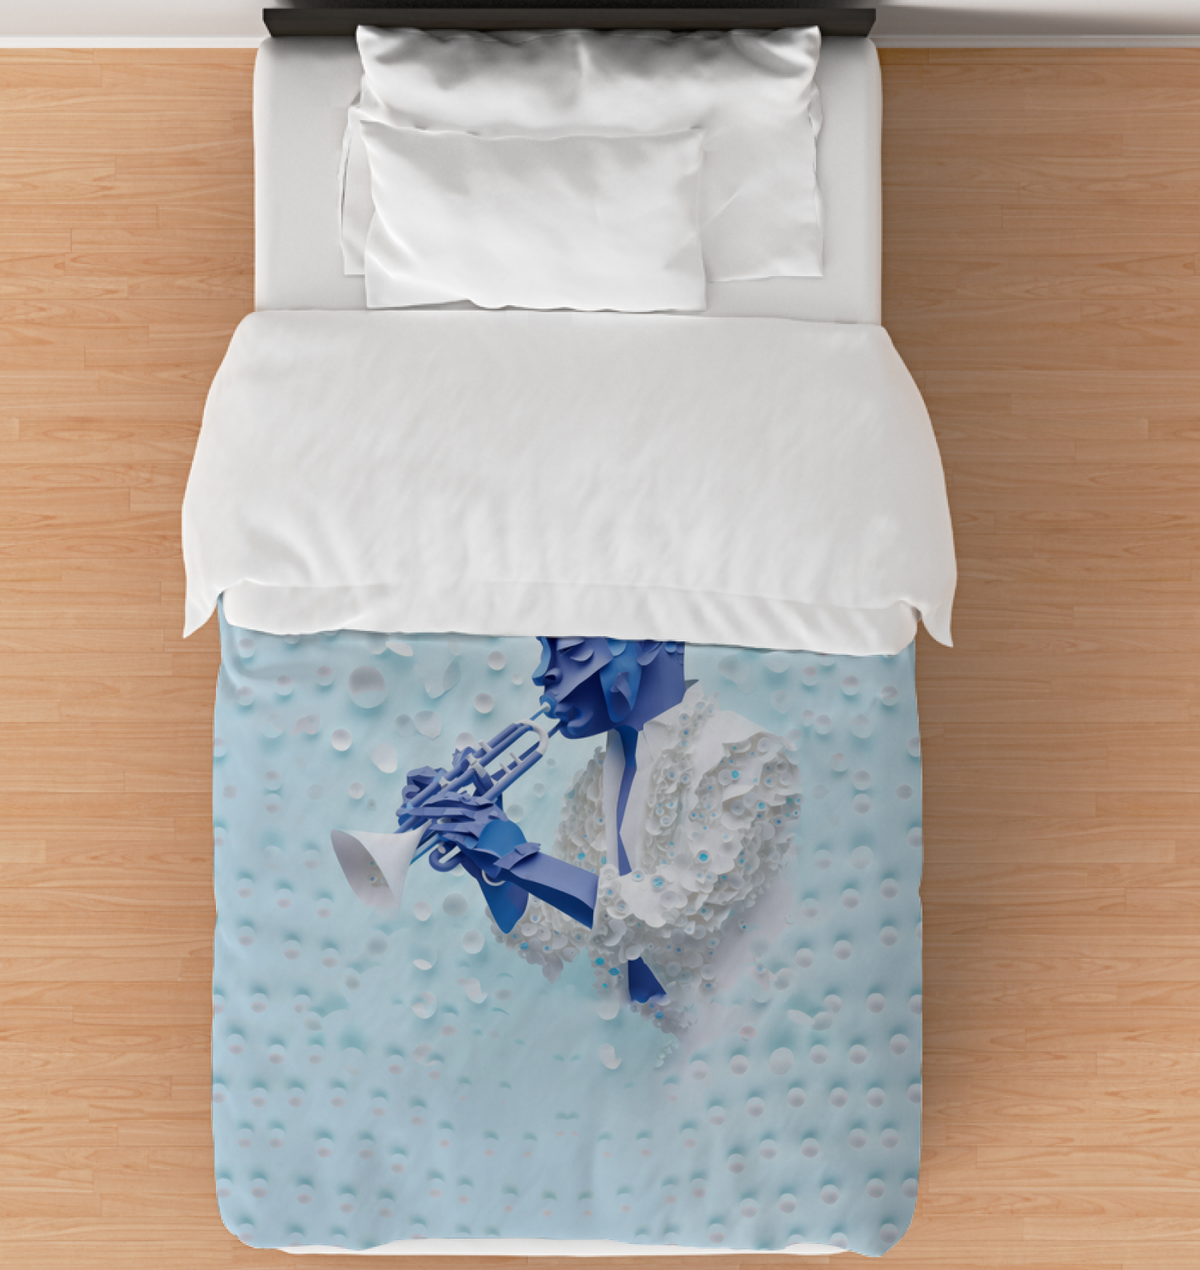 Elegant Folding Serenity Duvet Cover displayed on a neatly made bed, highlighting its tranquil design.